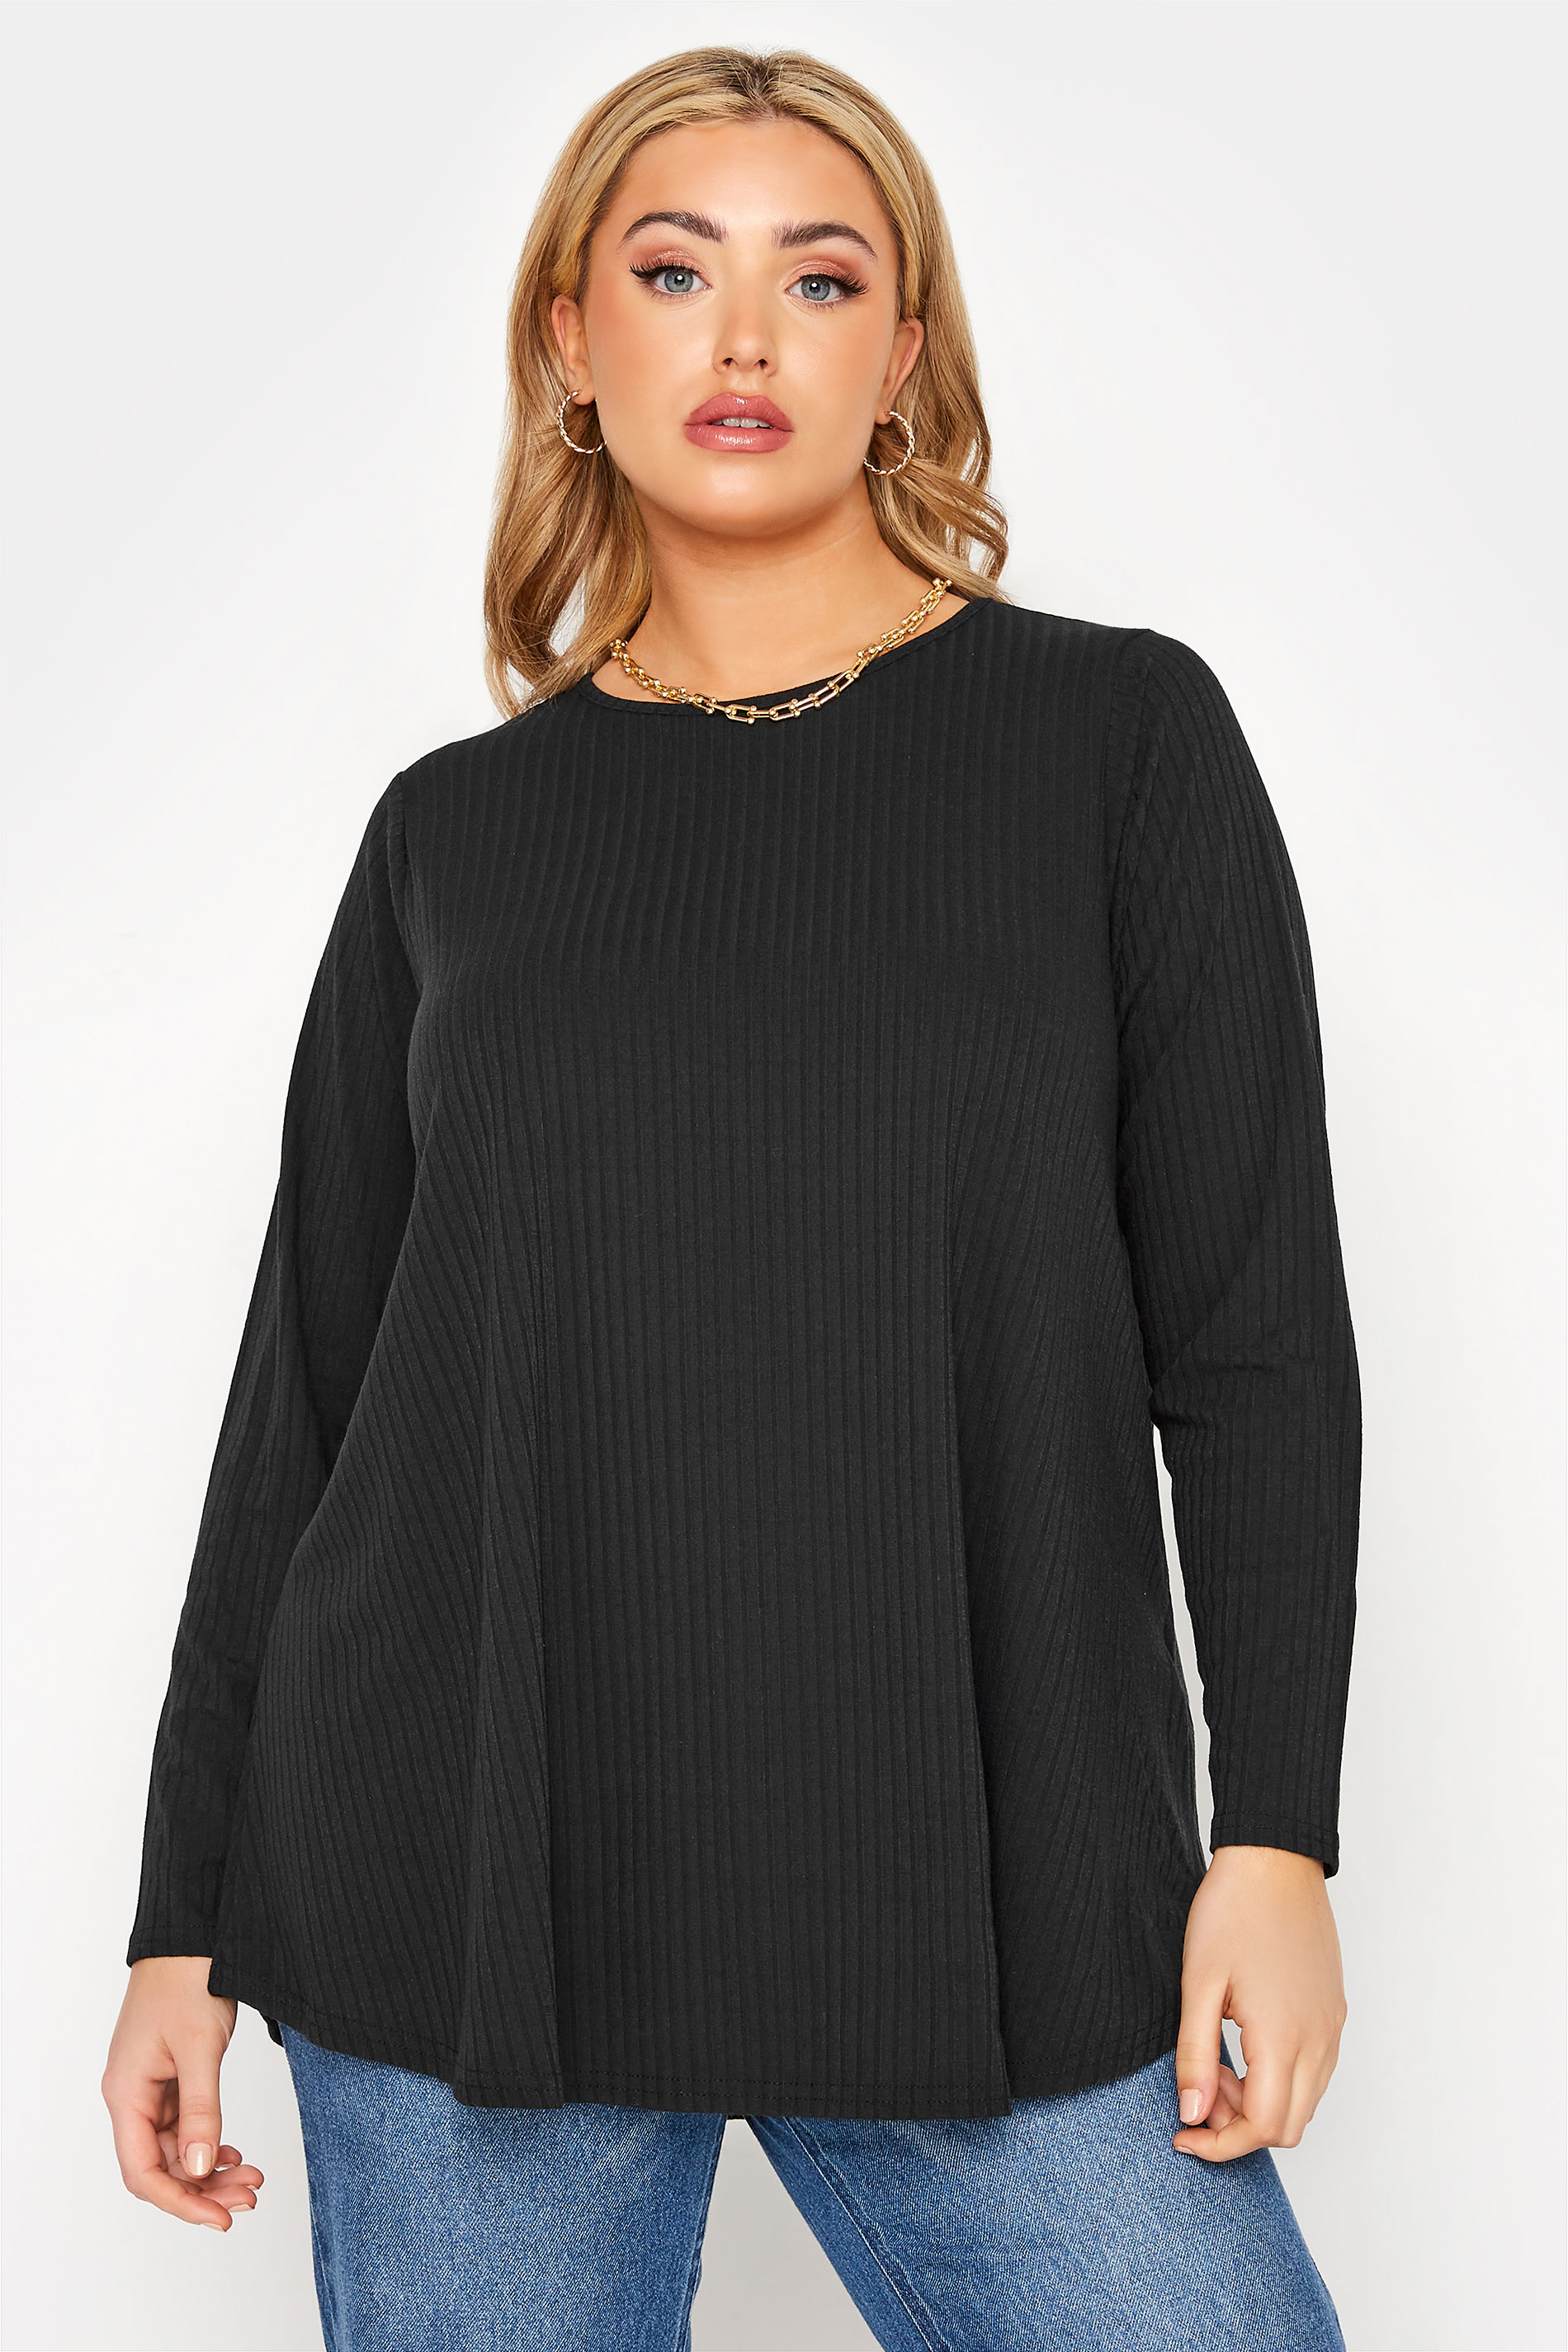 Grande taille  Tops Grande taille  Tops Jersey | LIMITED COLLECTION - Top Noir Nervuré Manches Longues - HO15684